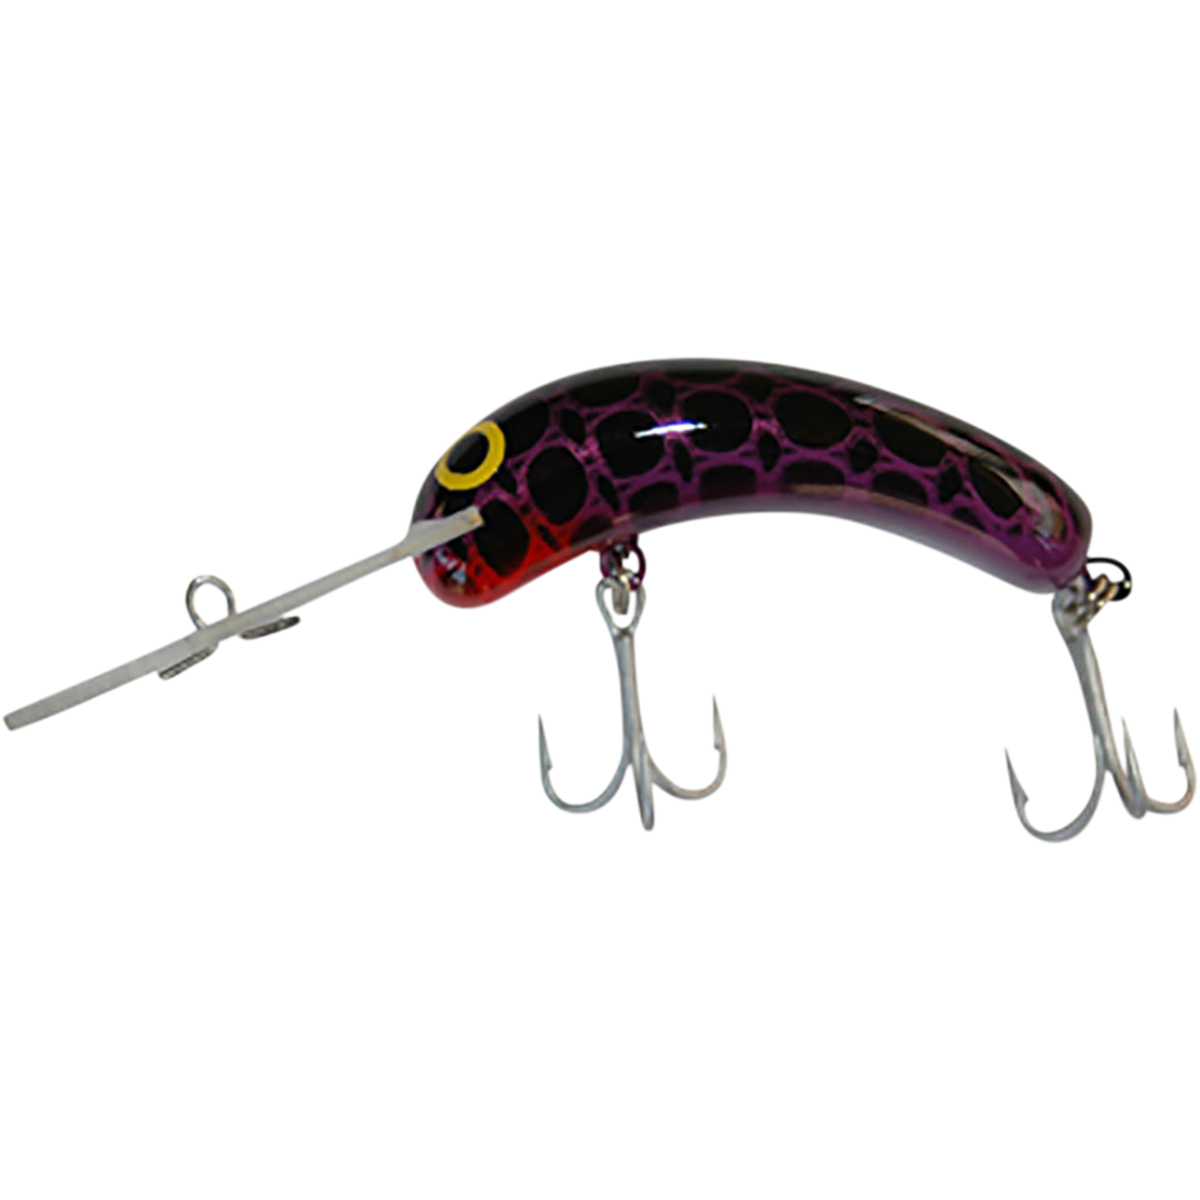 Australian Crafted Lures Invader Hard Body Lure 50mm Colour 69